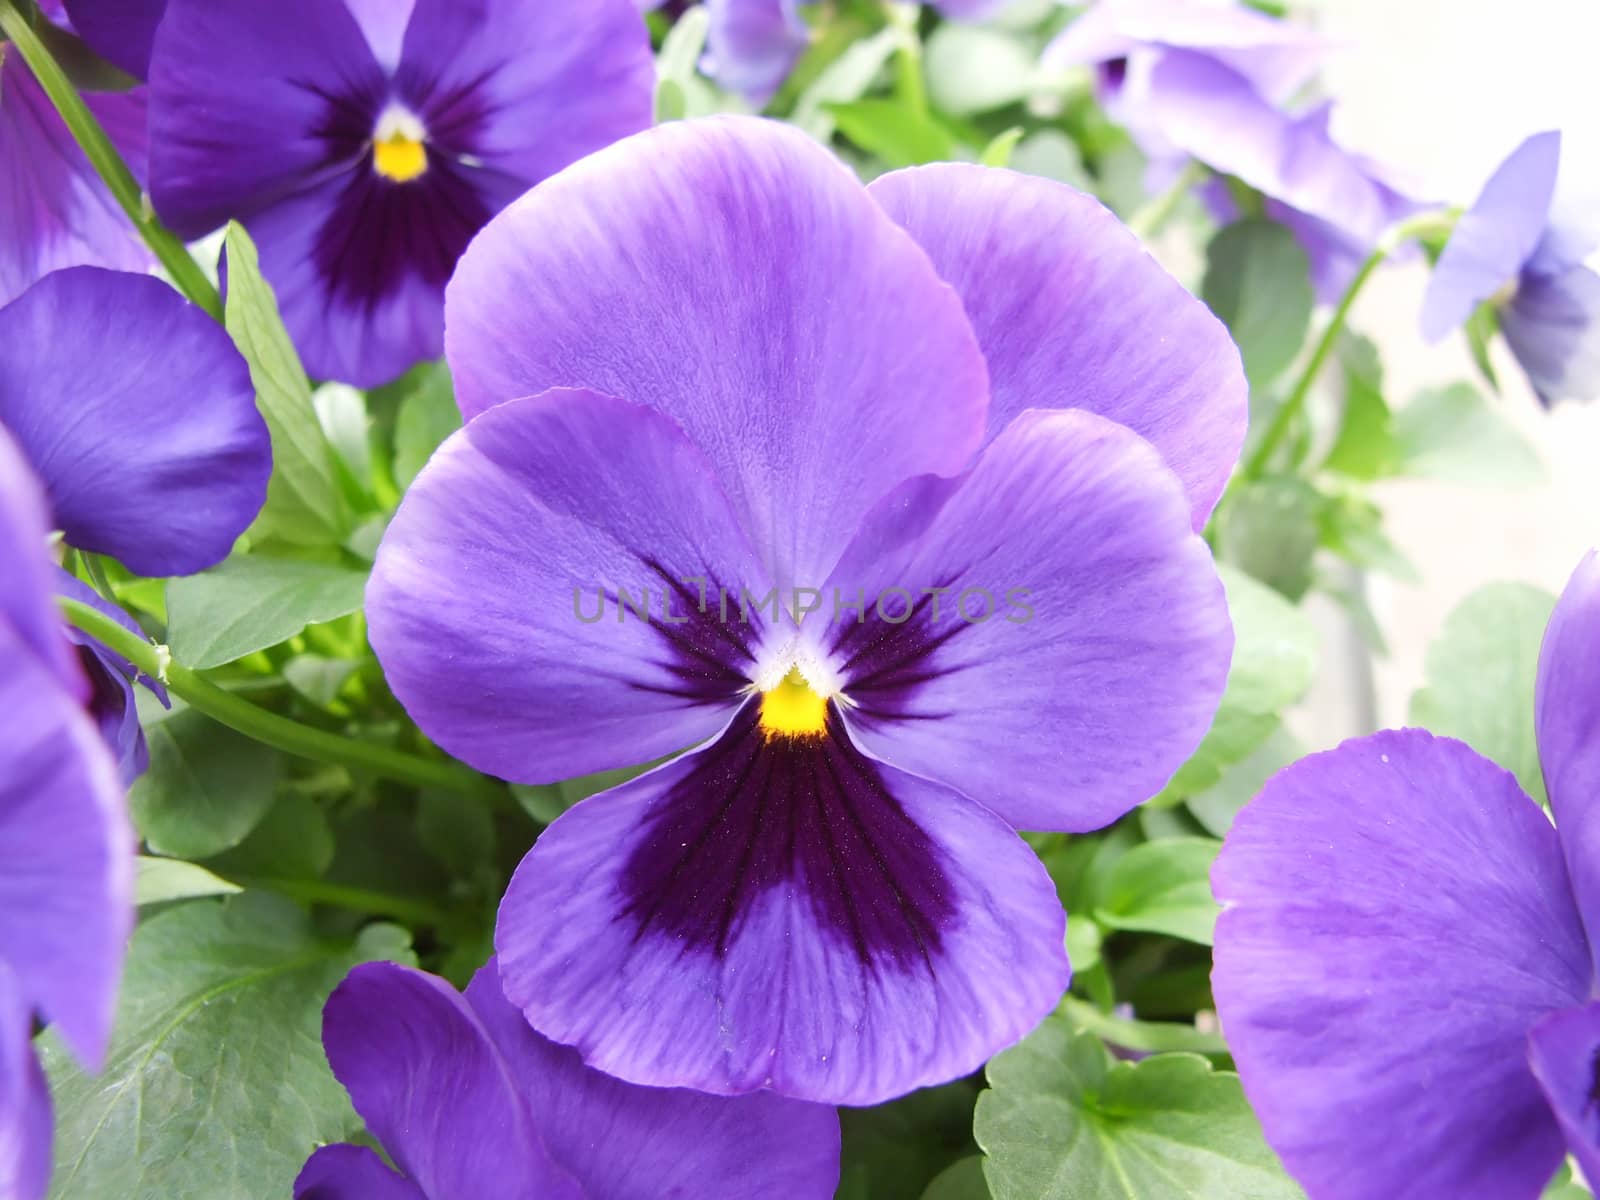 Purple Flower Pansies closeup of colorful pansy flower  by yuiyuize